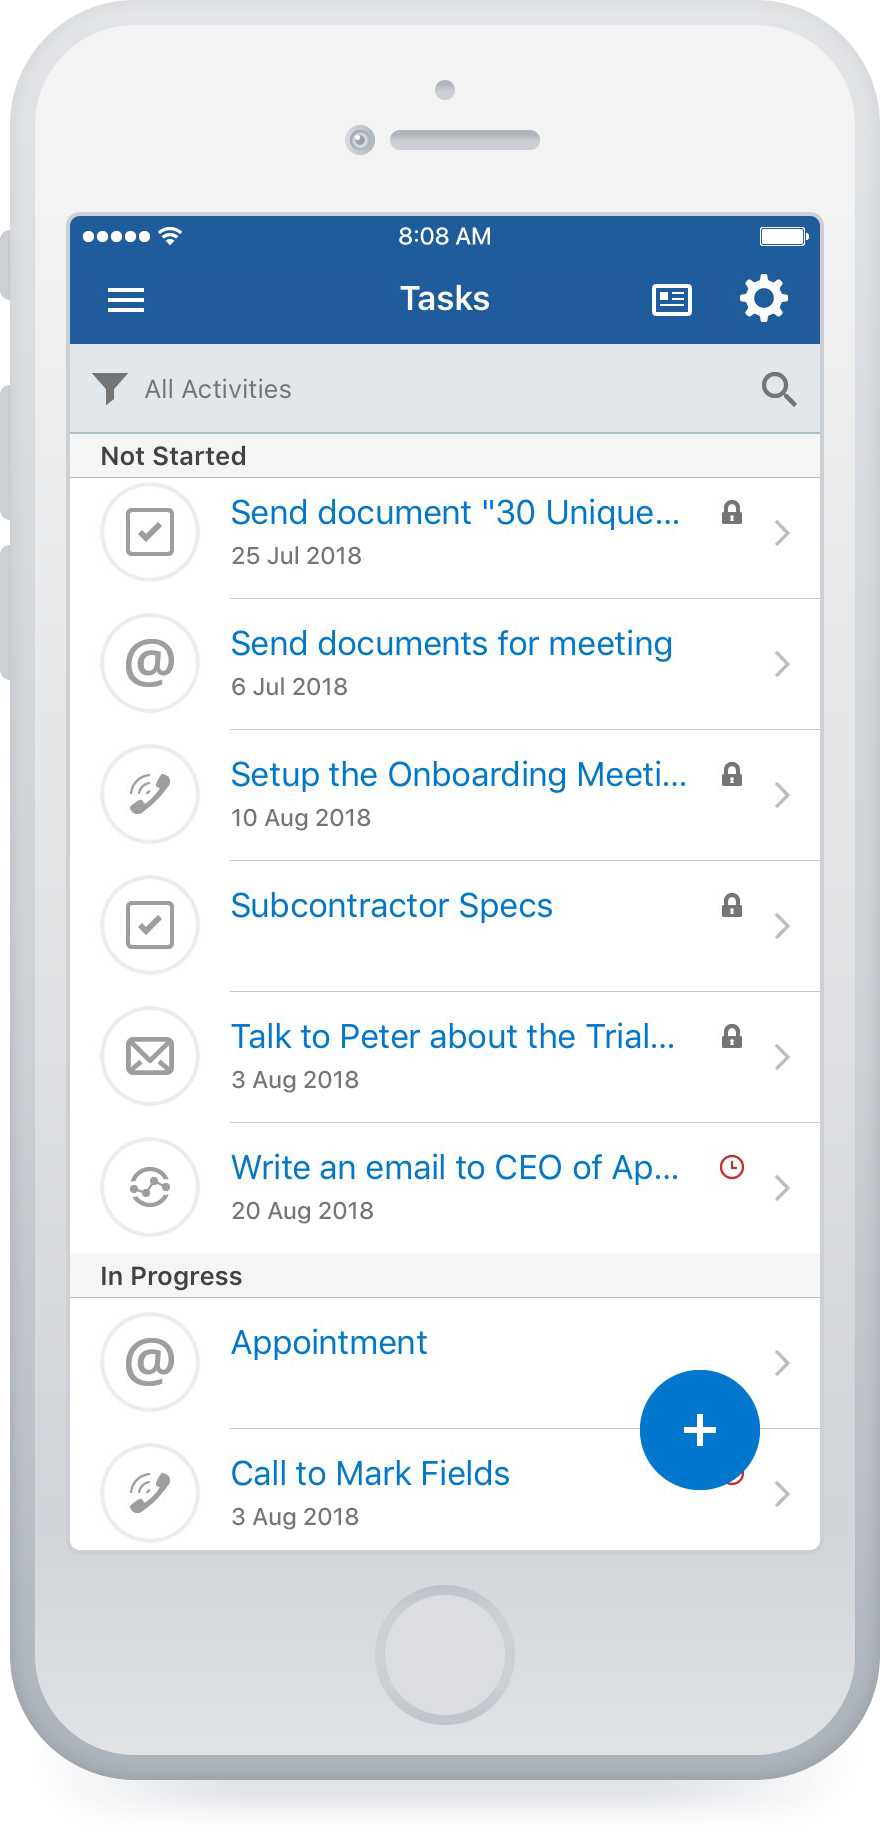 Pipeliner CRM Software - Mobile task list view